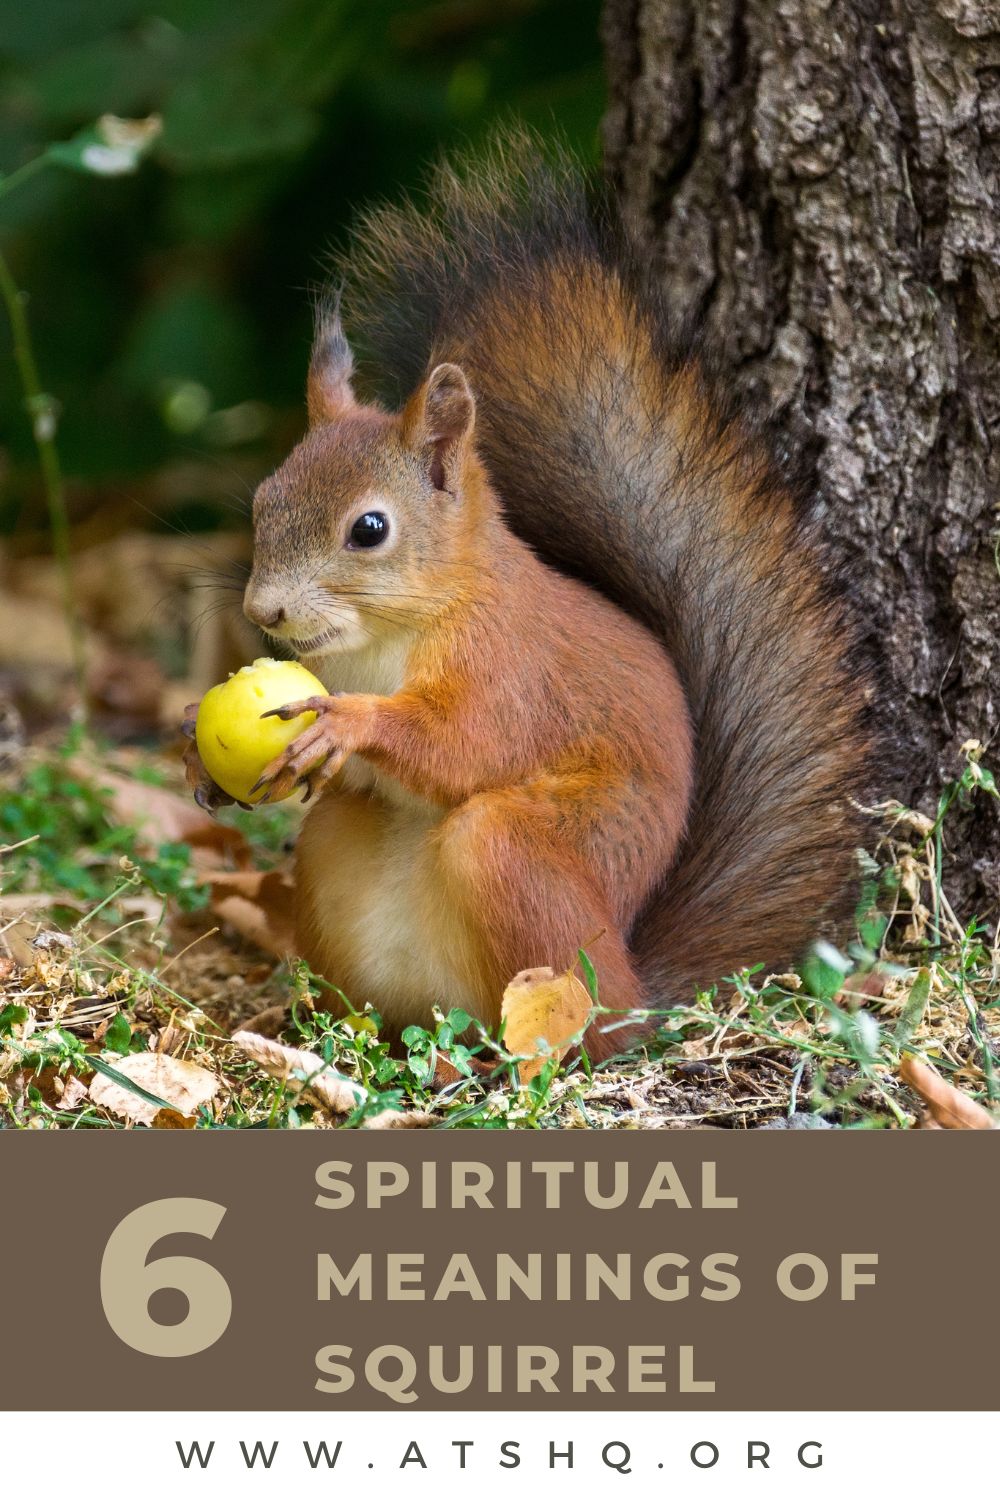 6 Spiritual Meanings of Squirrel